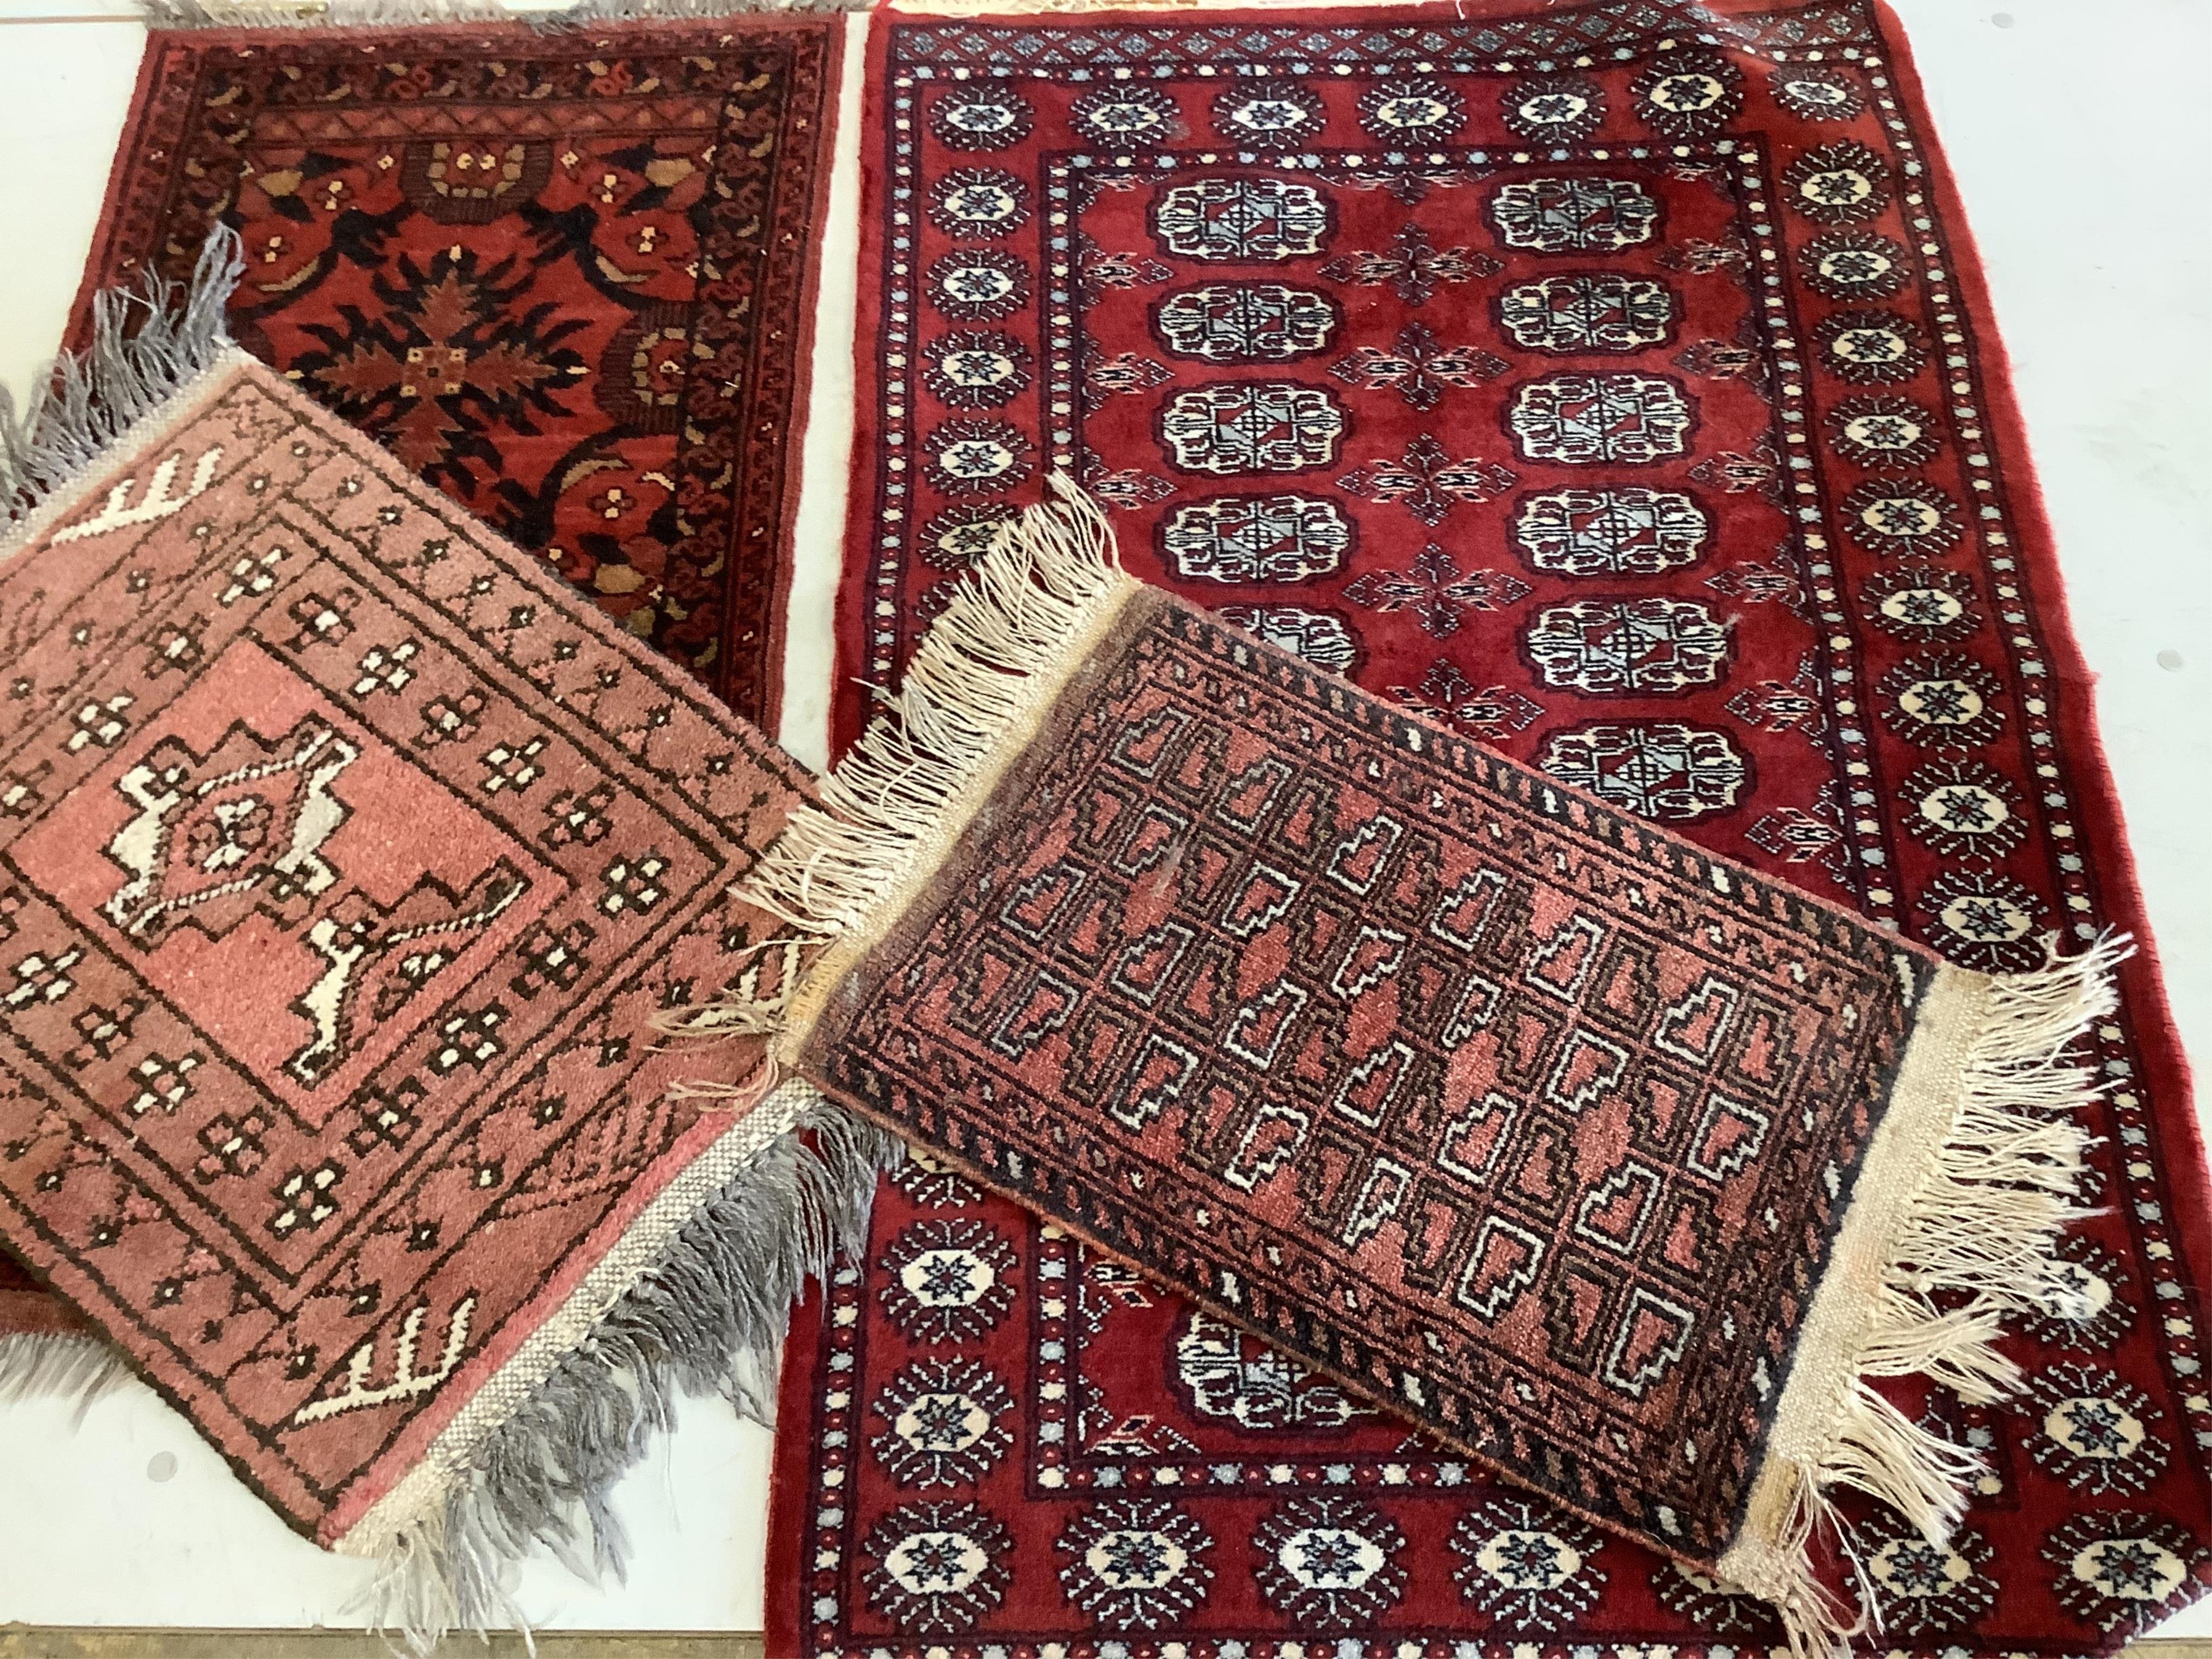 Four assorted Bokhara and Belouch mats, largest 120 x 78cm. Condition - fair